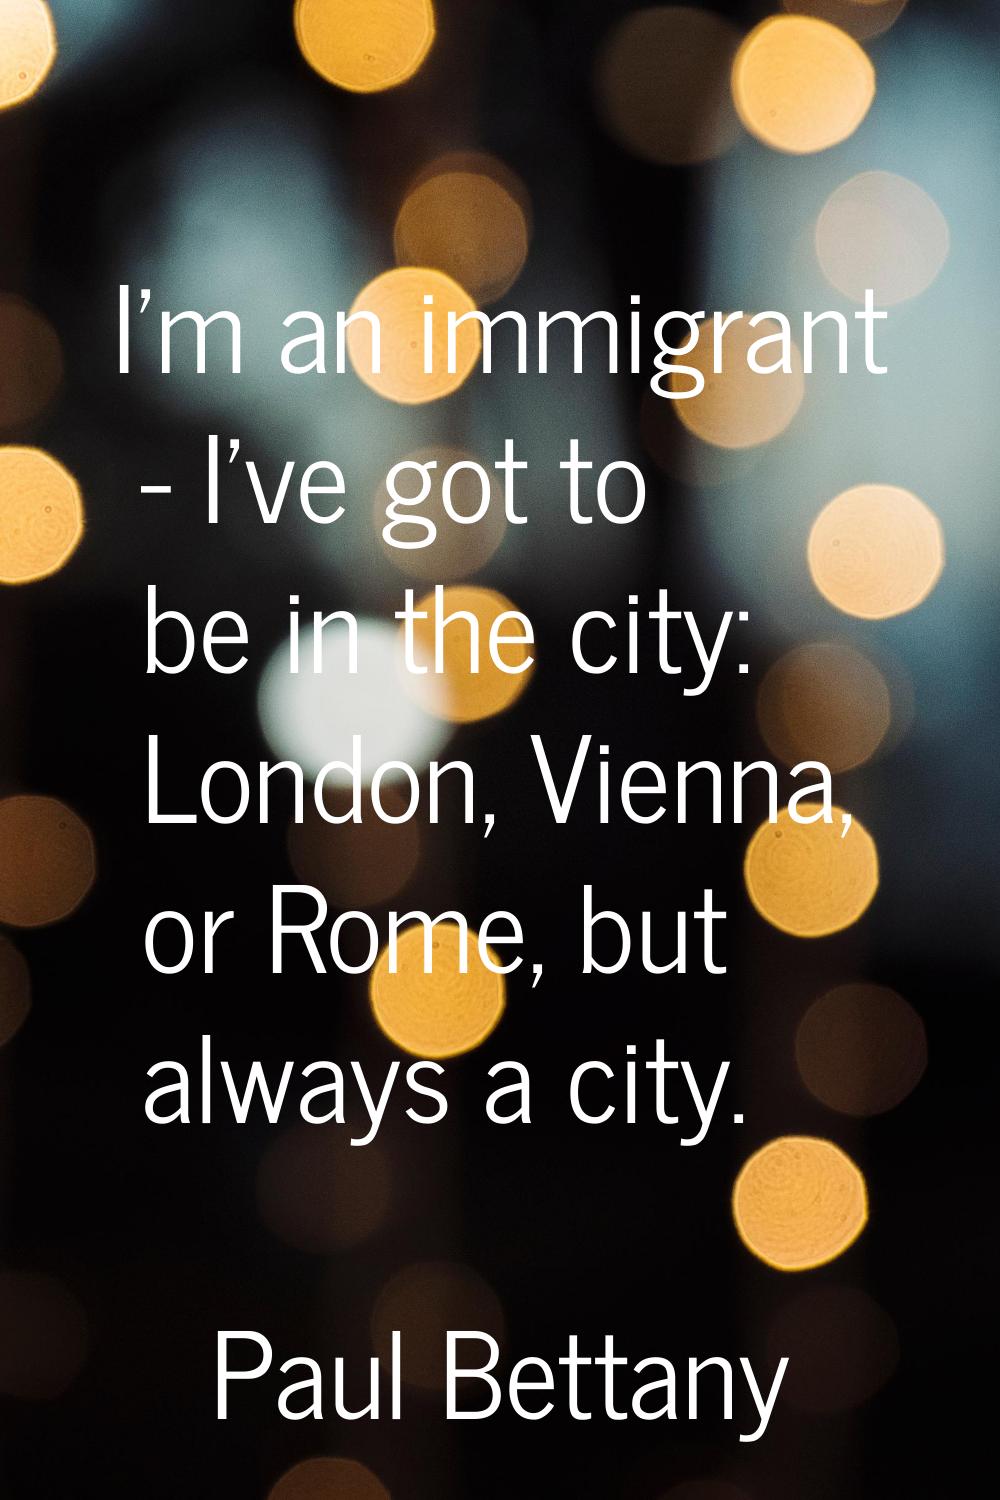 I'm an immigrant - I've got to be in the city: London, Vienna, or Rome, but always a city.